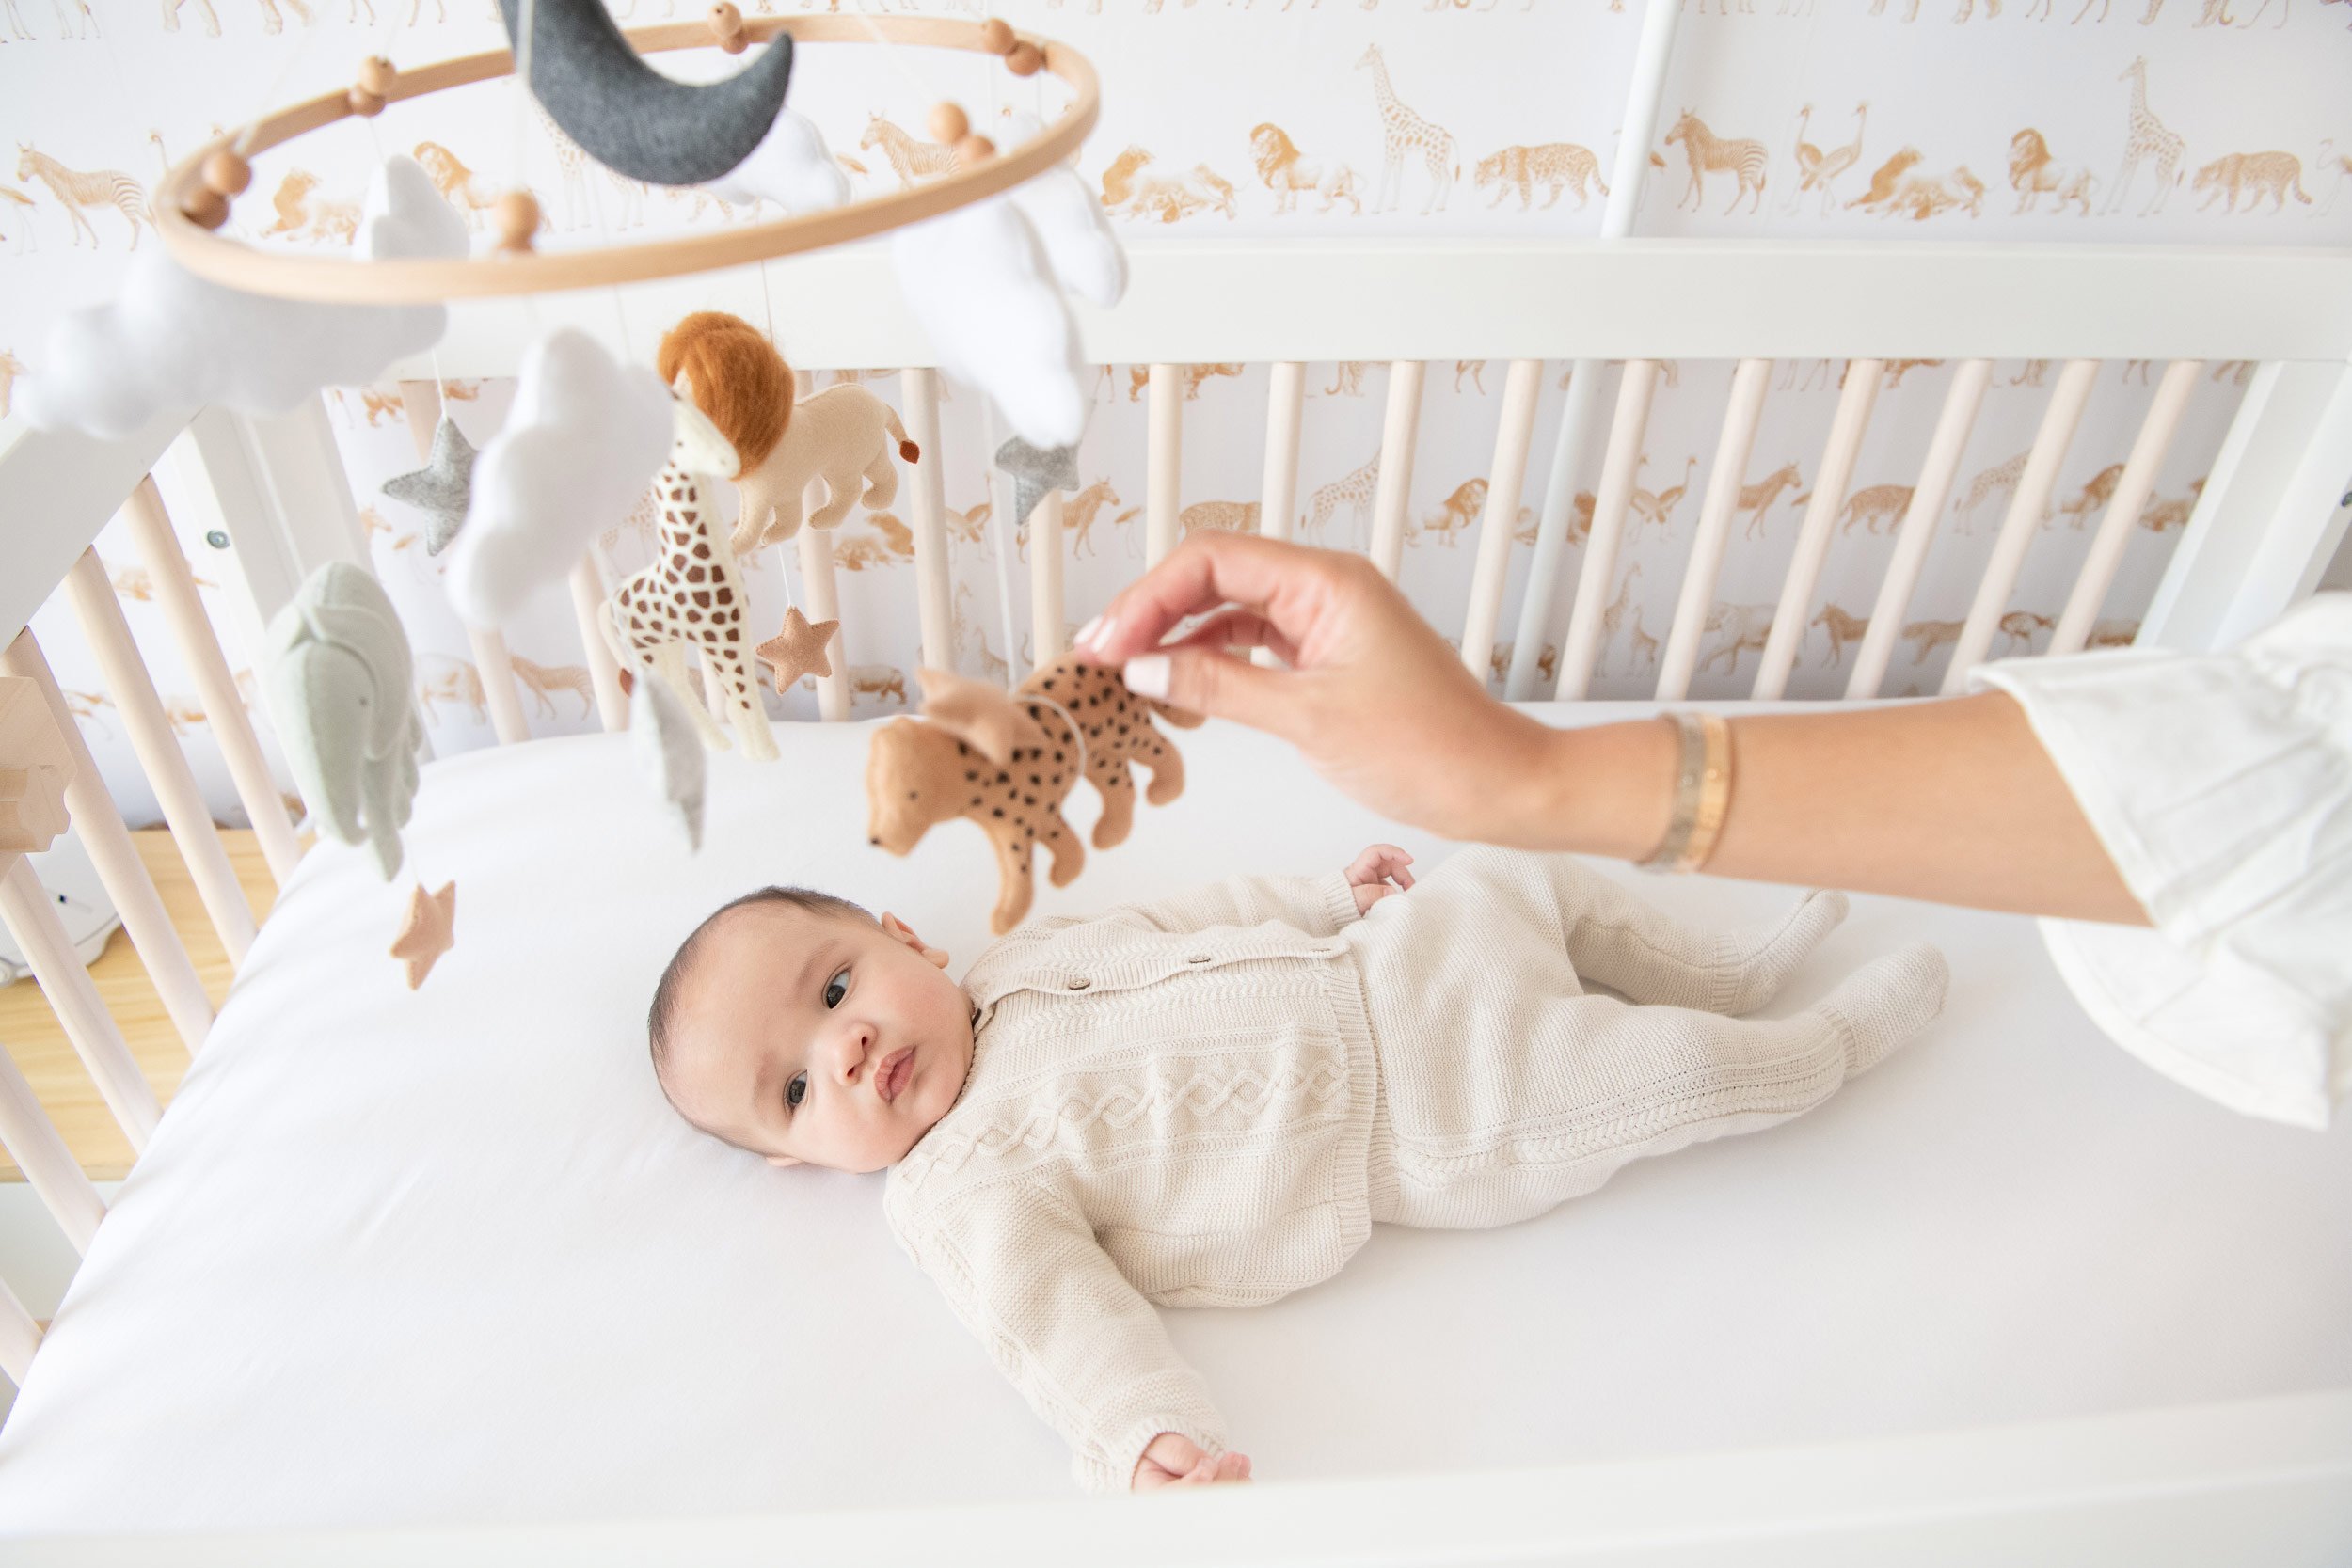  In a New York Nursery, a baby boy looks at his animal mobile by Nicole Hawkins Photography. unique mobile animal mobile #NicoleHawkinsPhotography #InHomeNewborns #NurseryNewborns #NYCbabyphotography #babyportraits #ZooNursery #familyportraits 